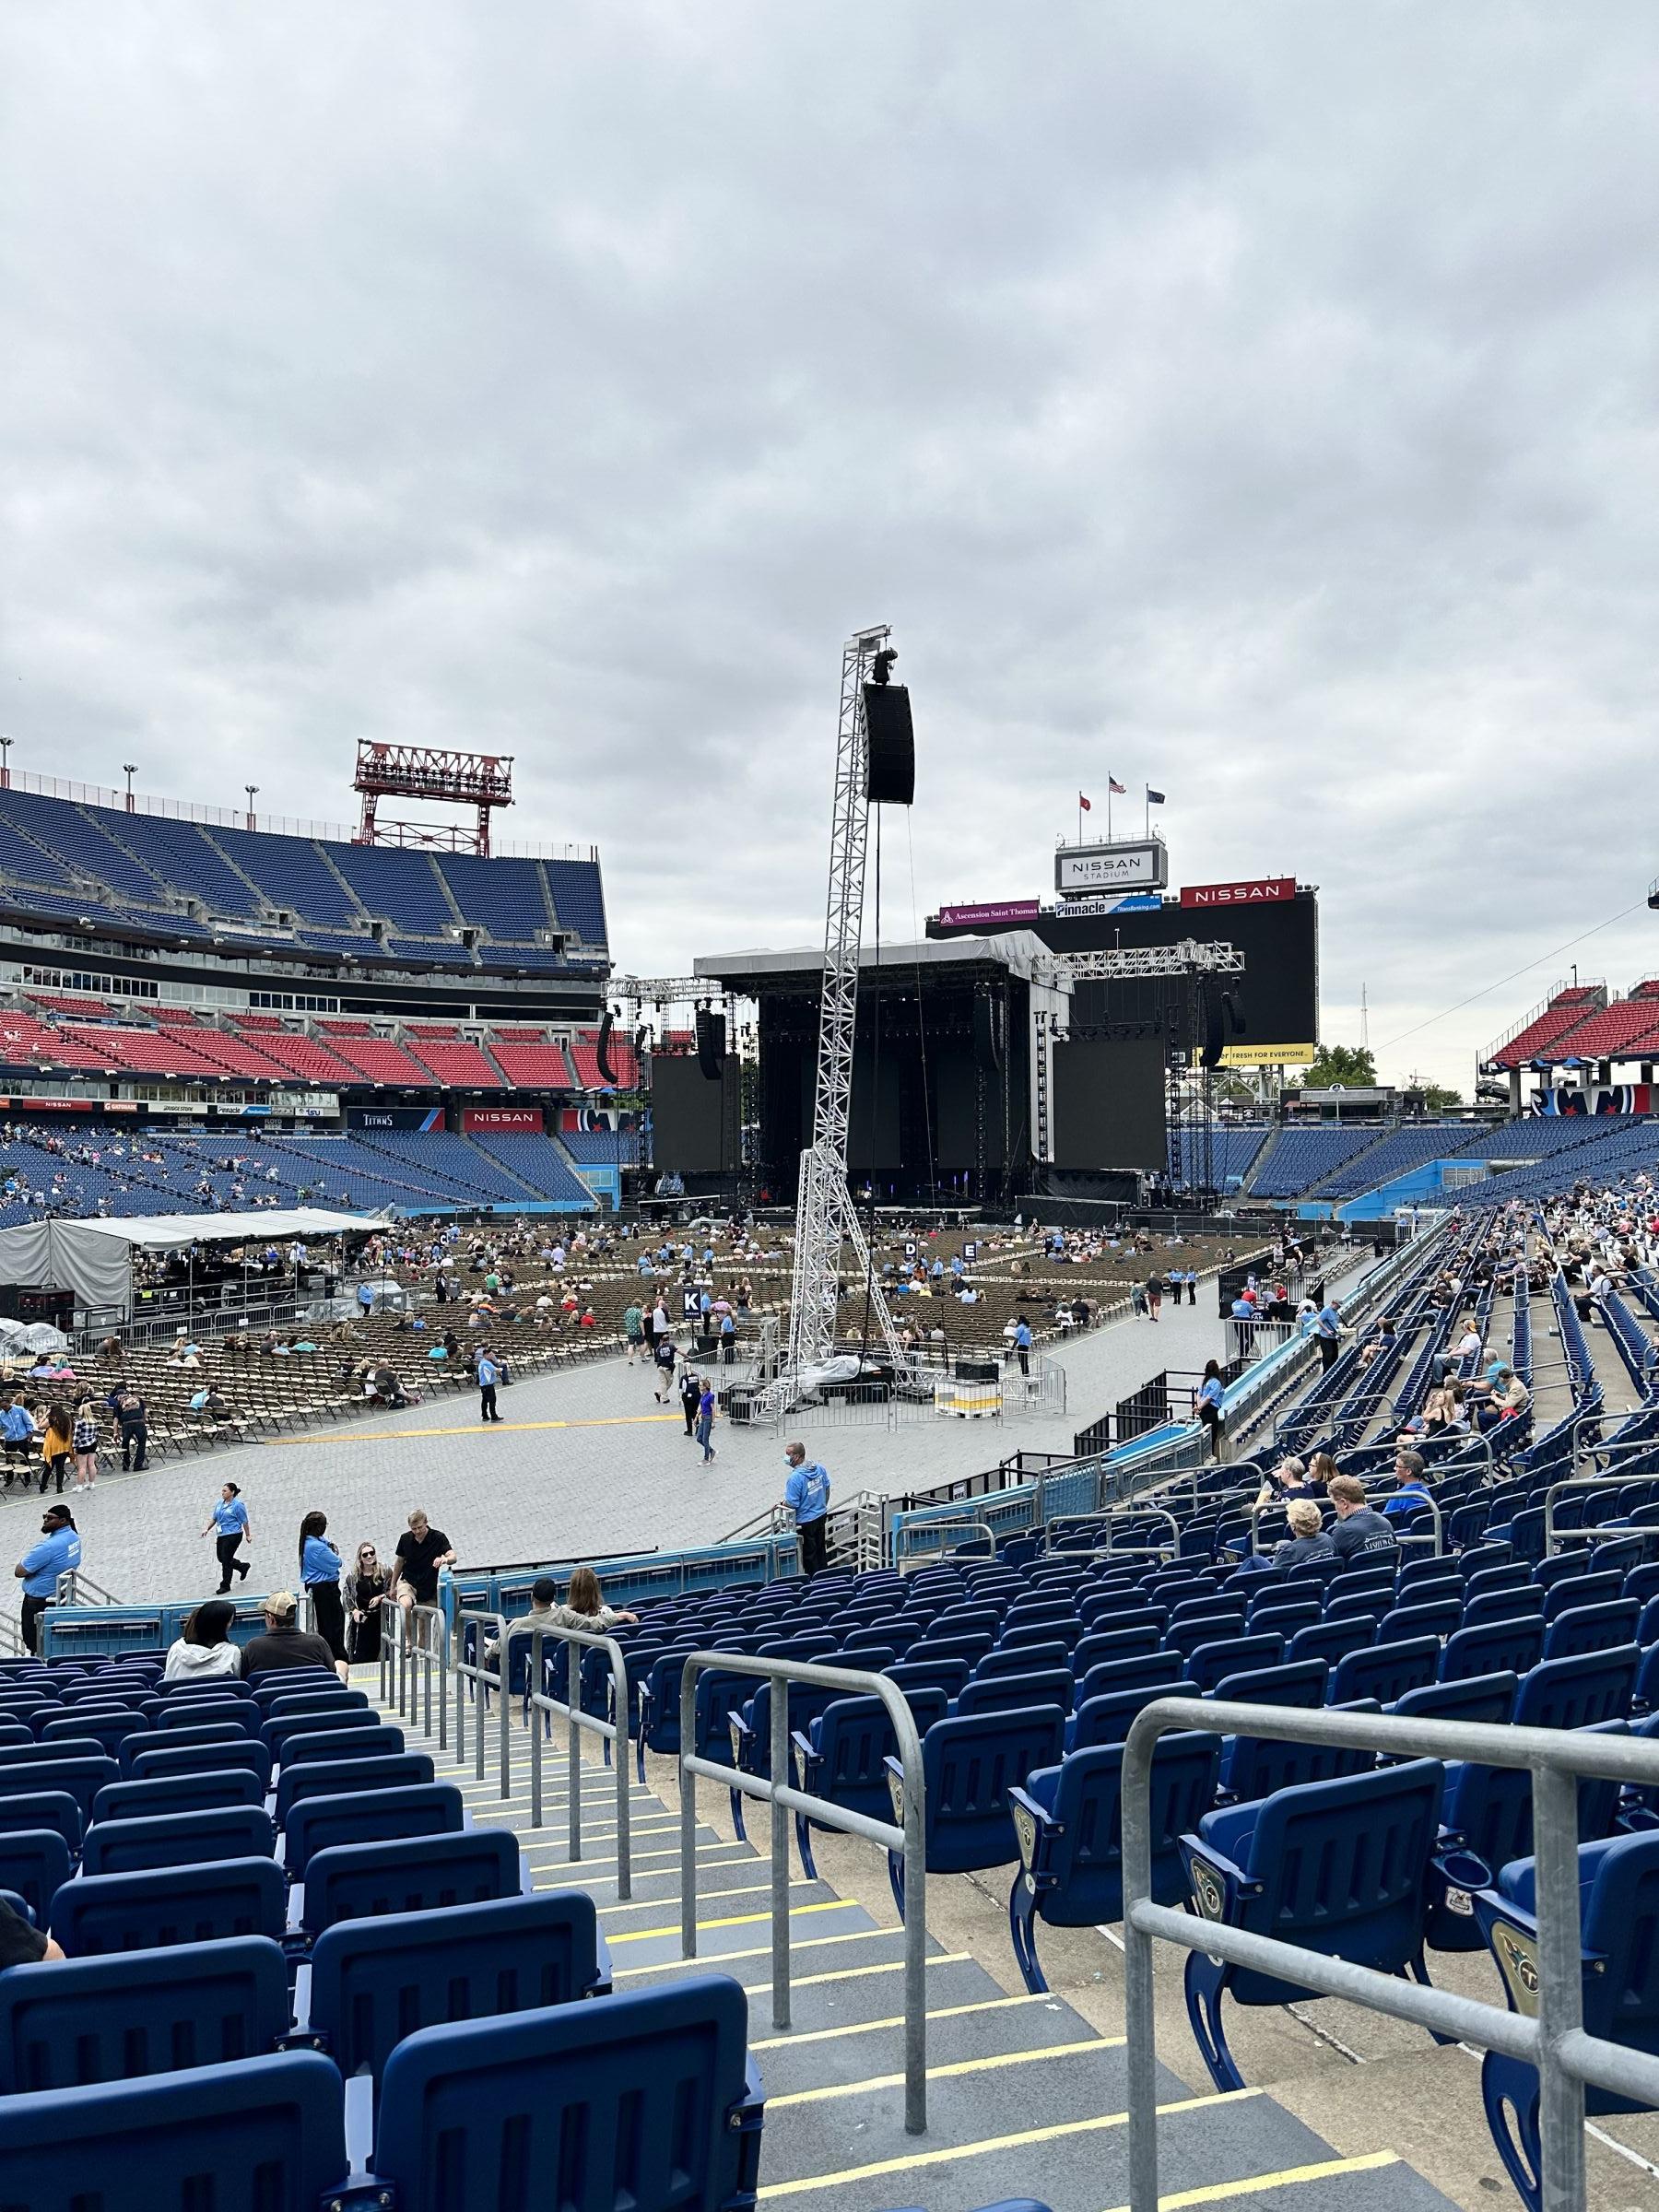 section 119, row u seat view  for concert - nissan stadium